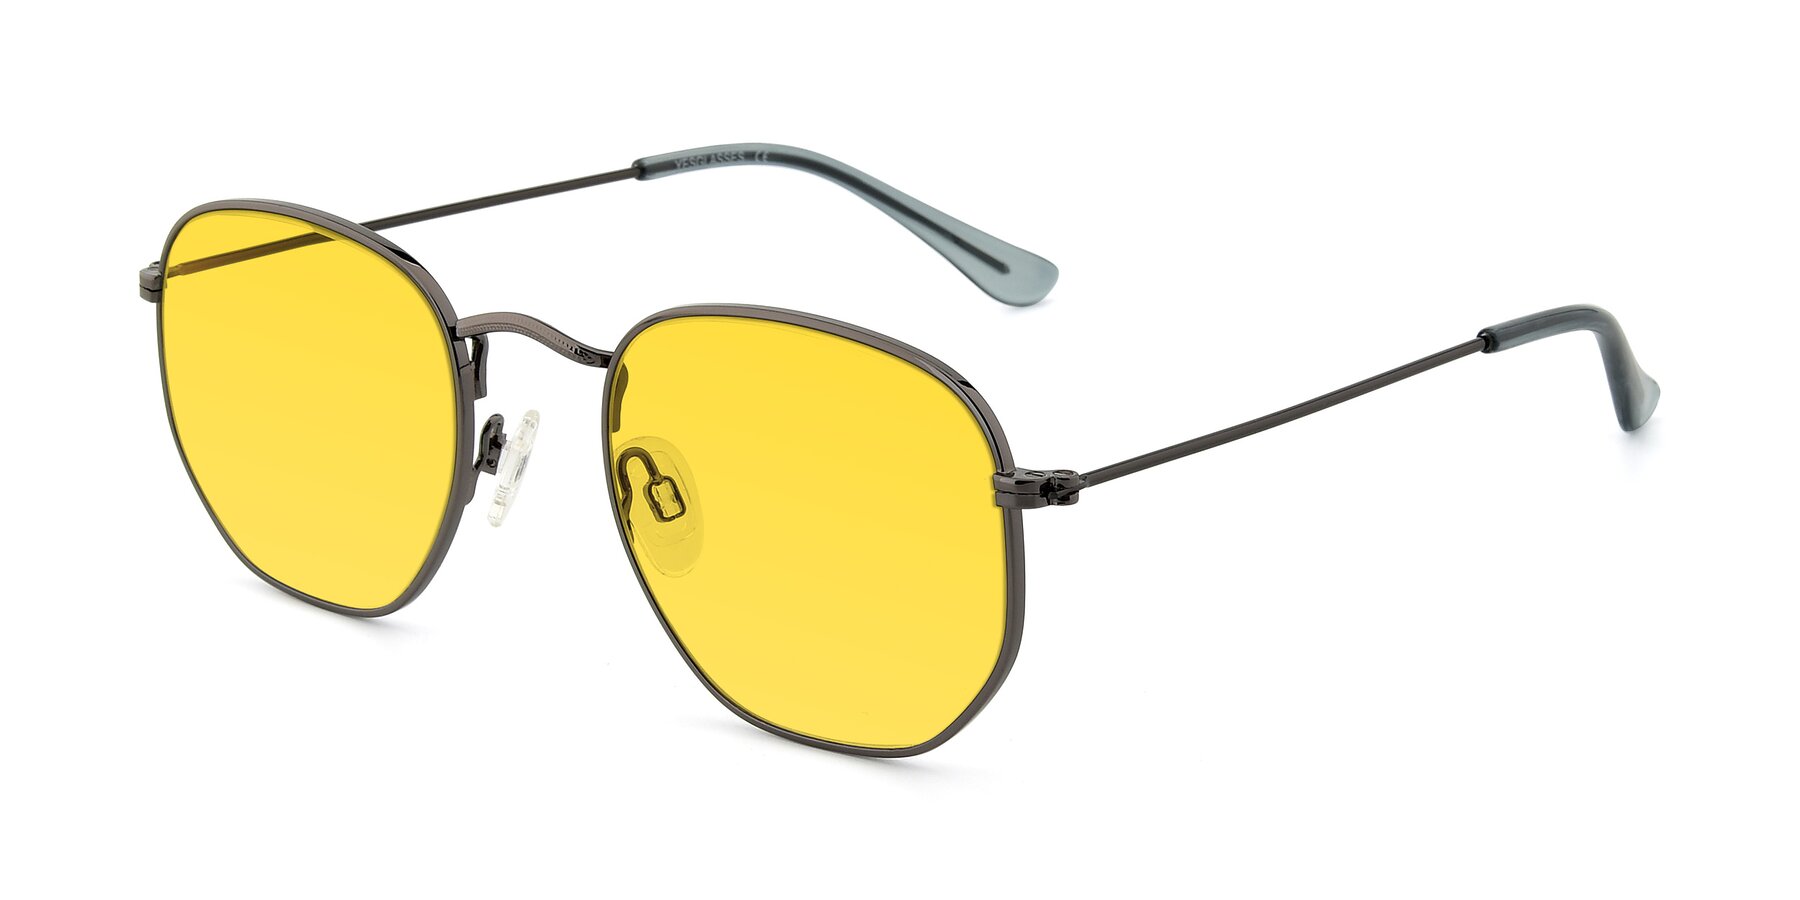 Angle of SSR1944 in Grey with Yellow Tinted Lenses